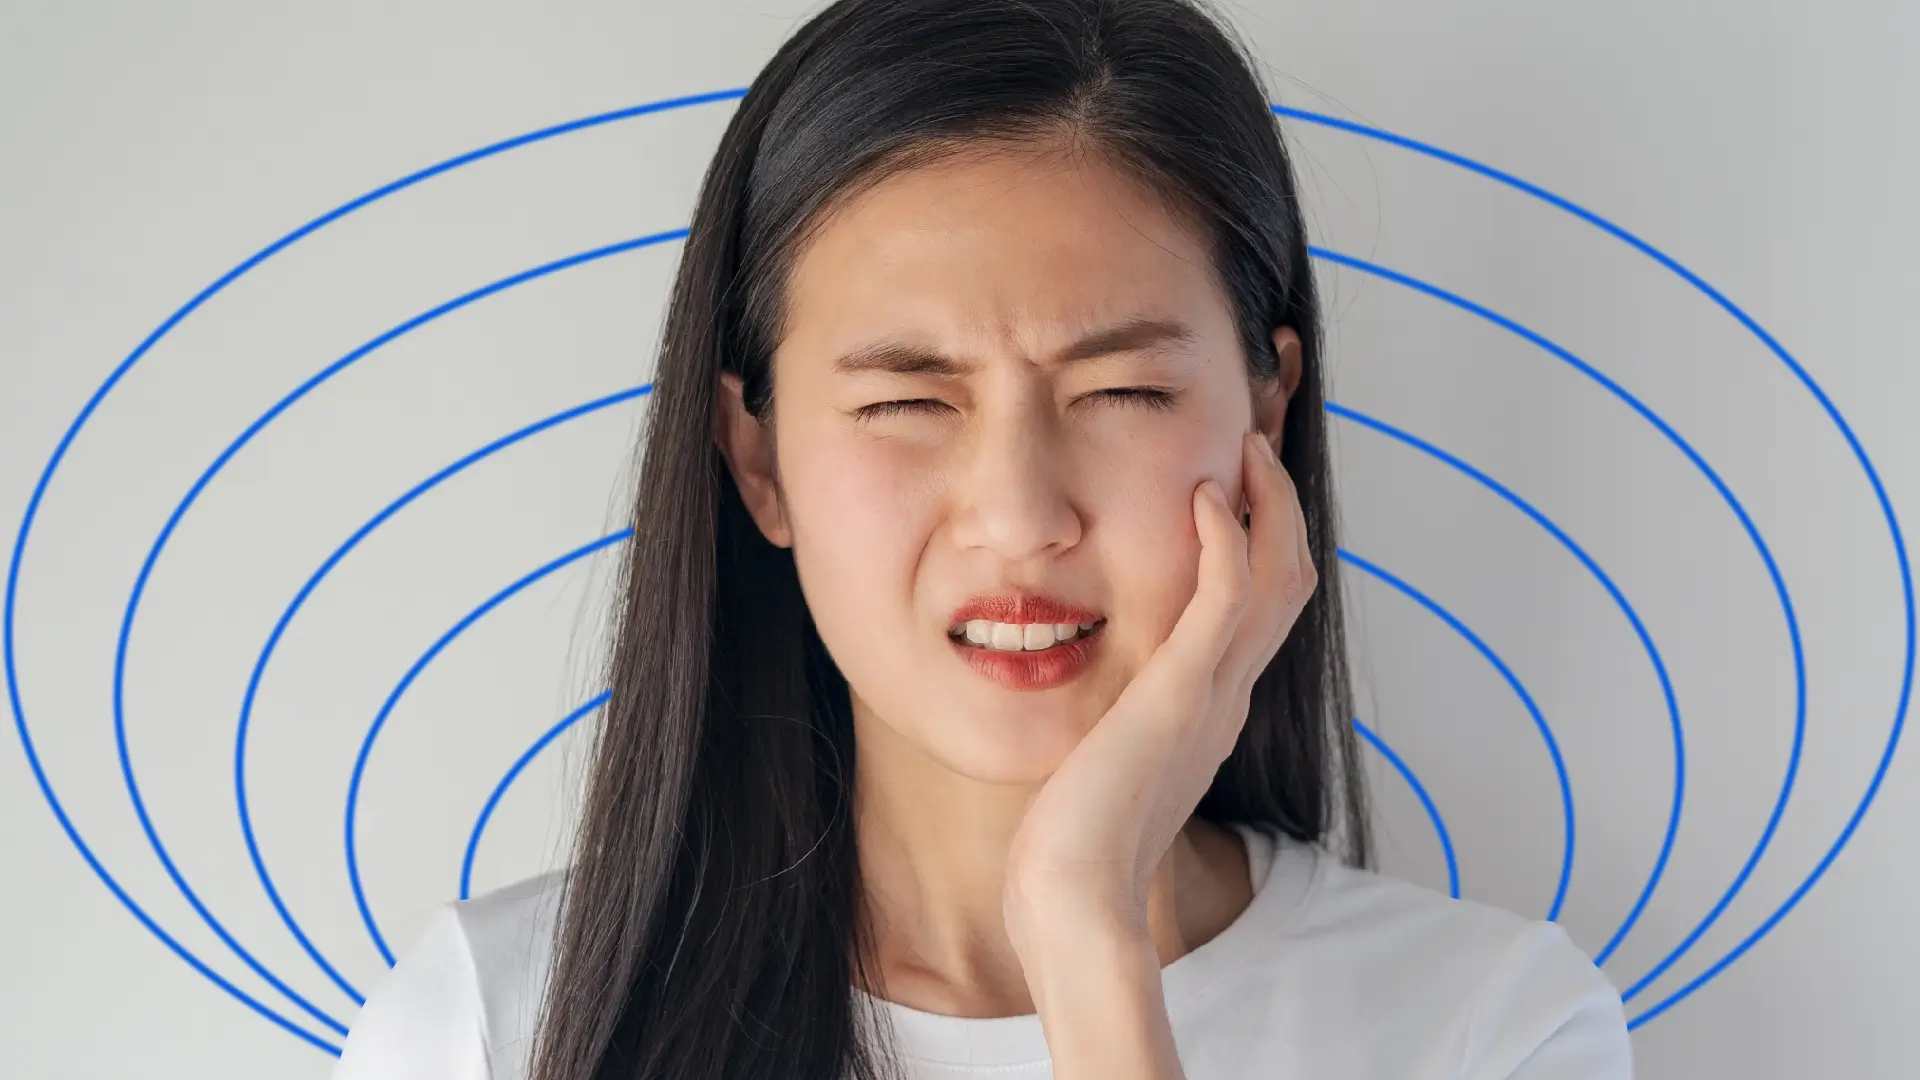 A woman experiencing discomfort after removing braces